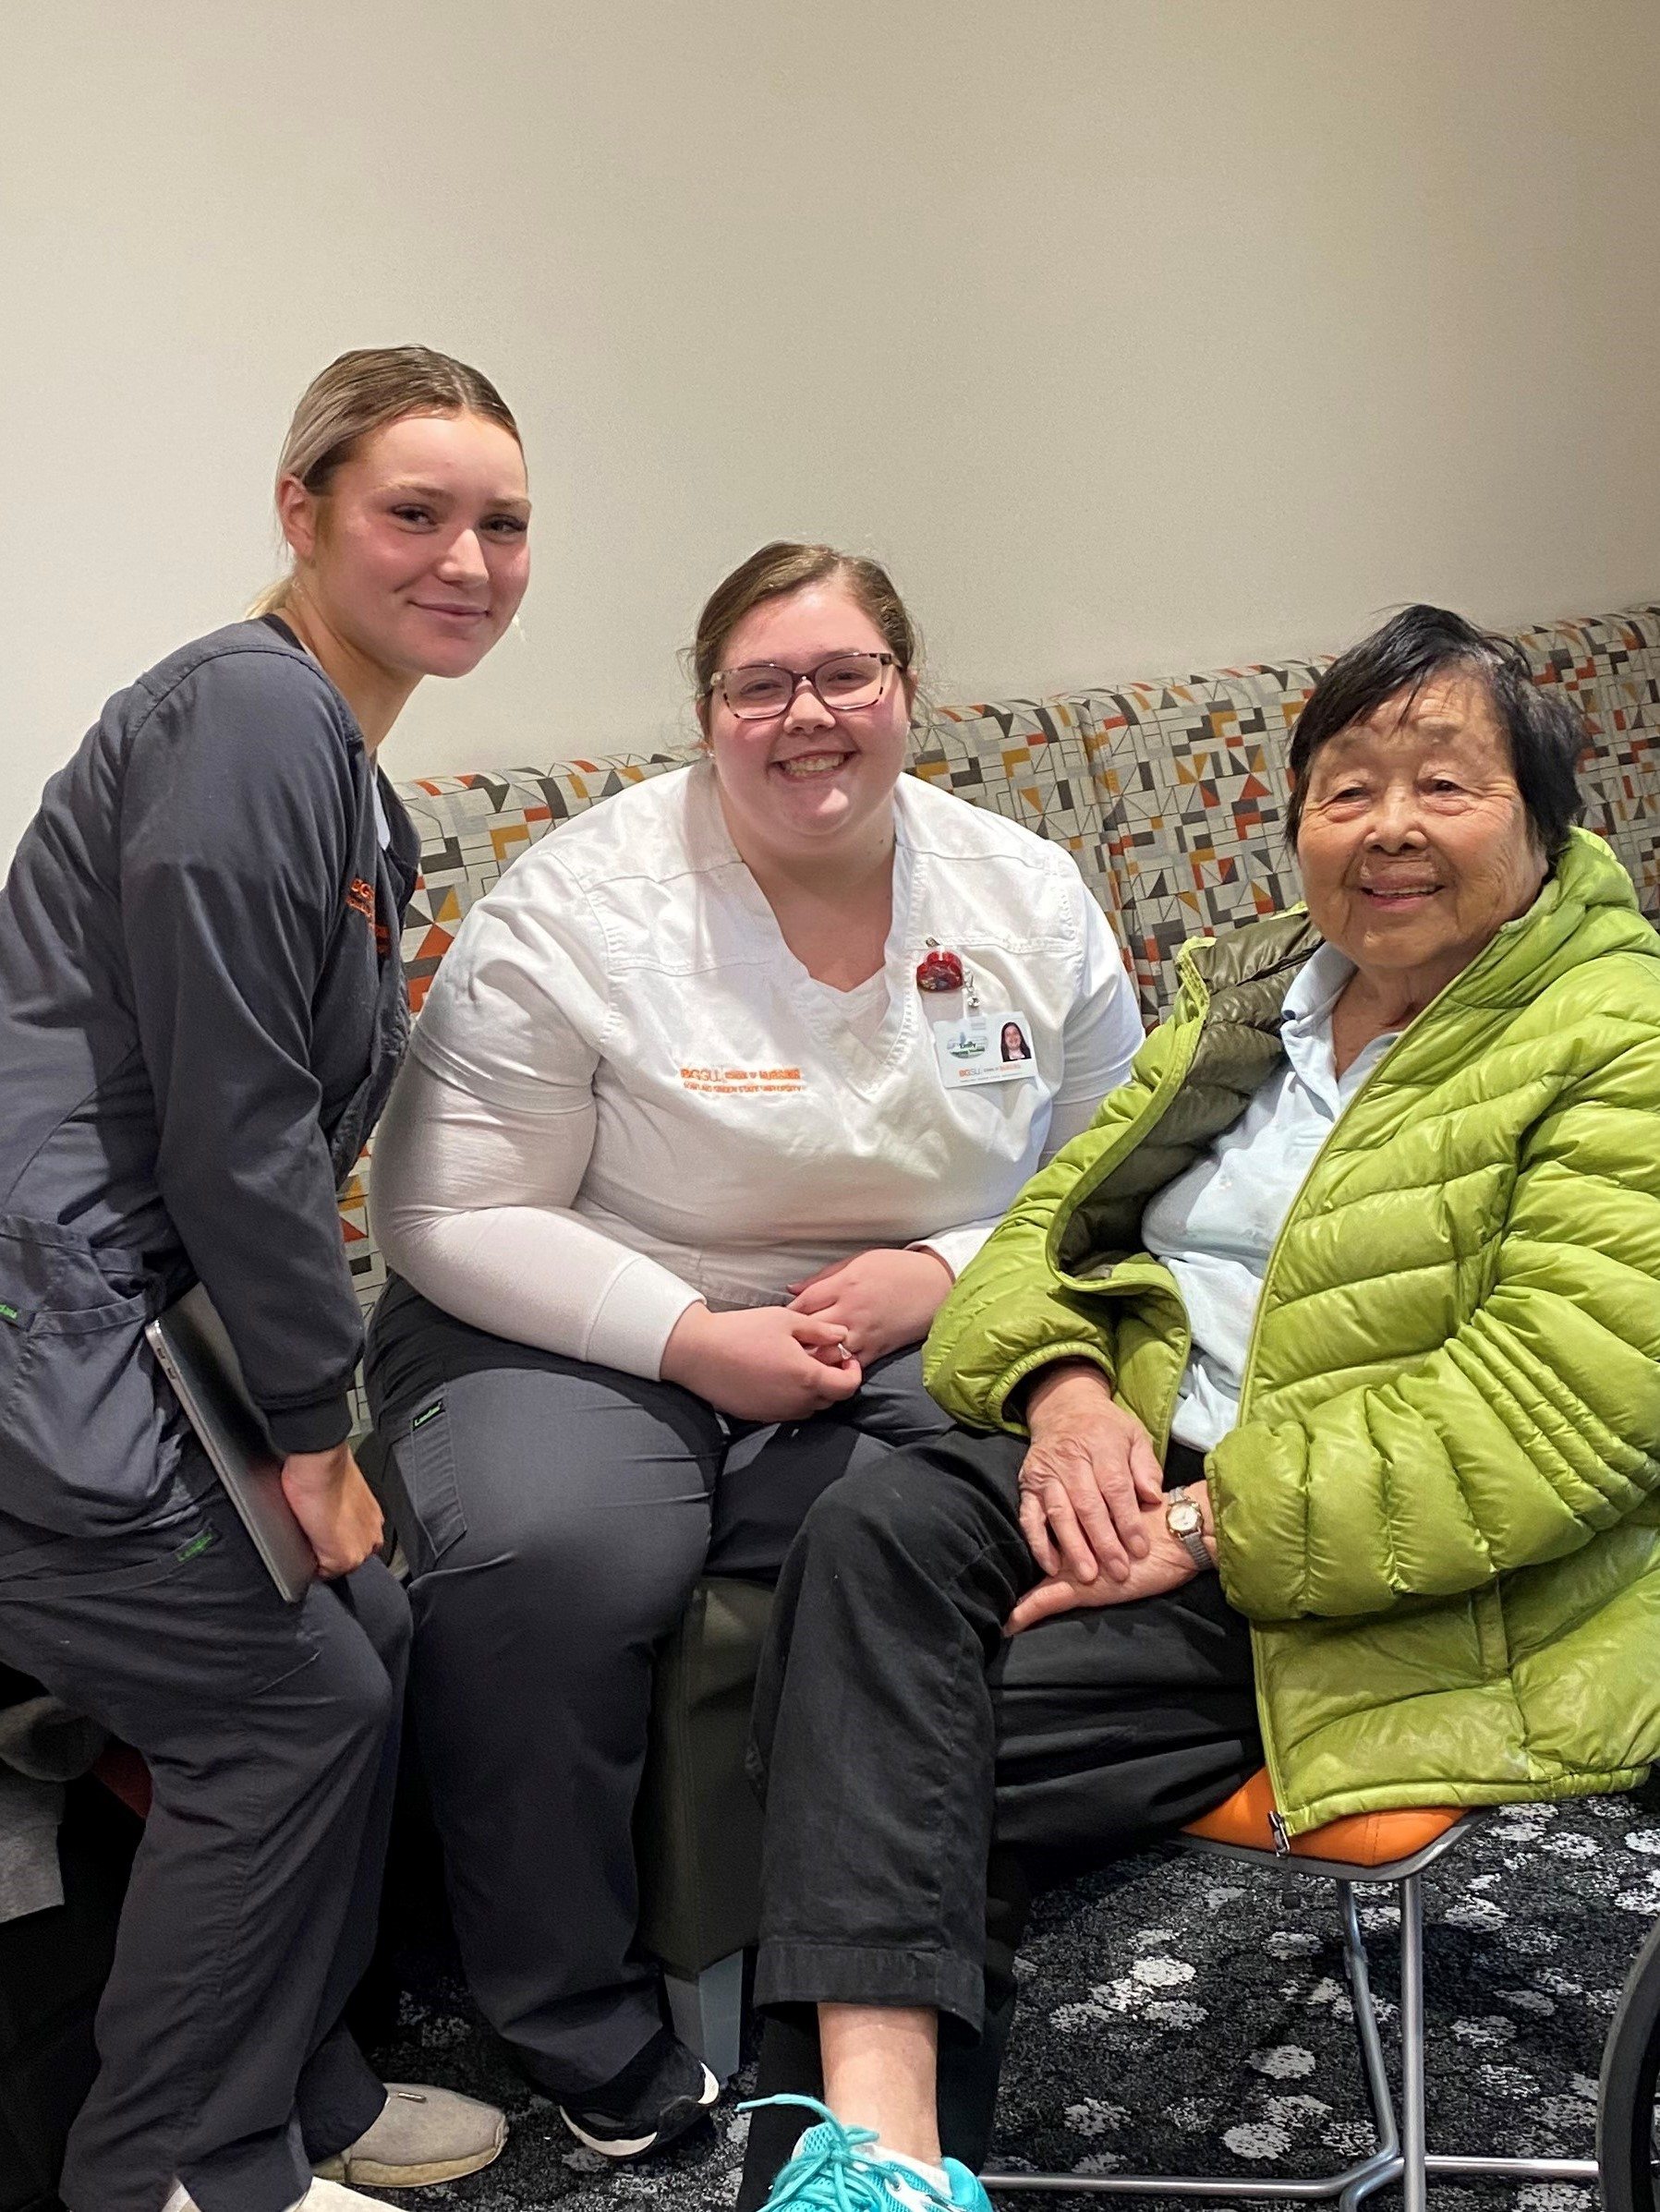 Local Nursing Home visits students they met during clinical rotations